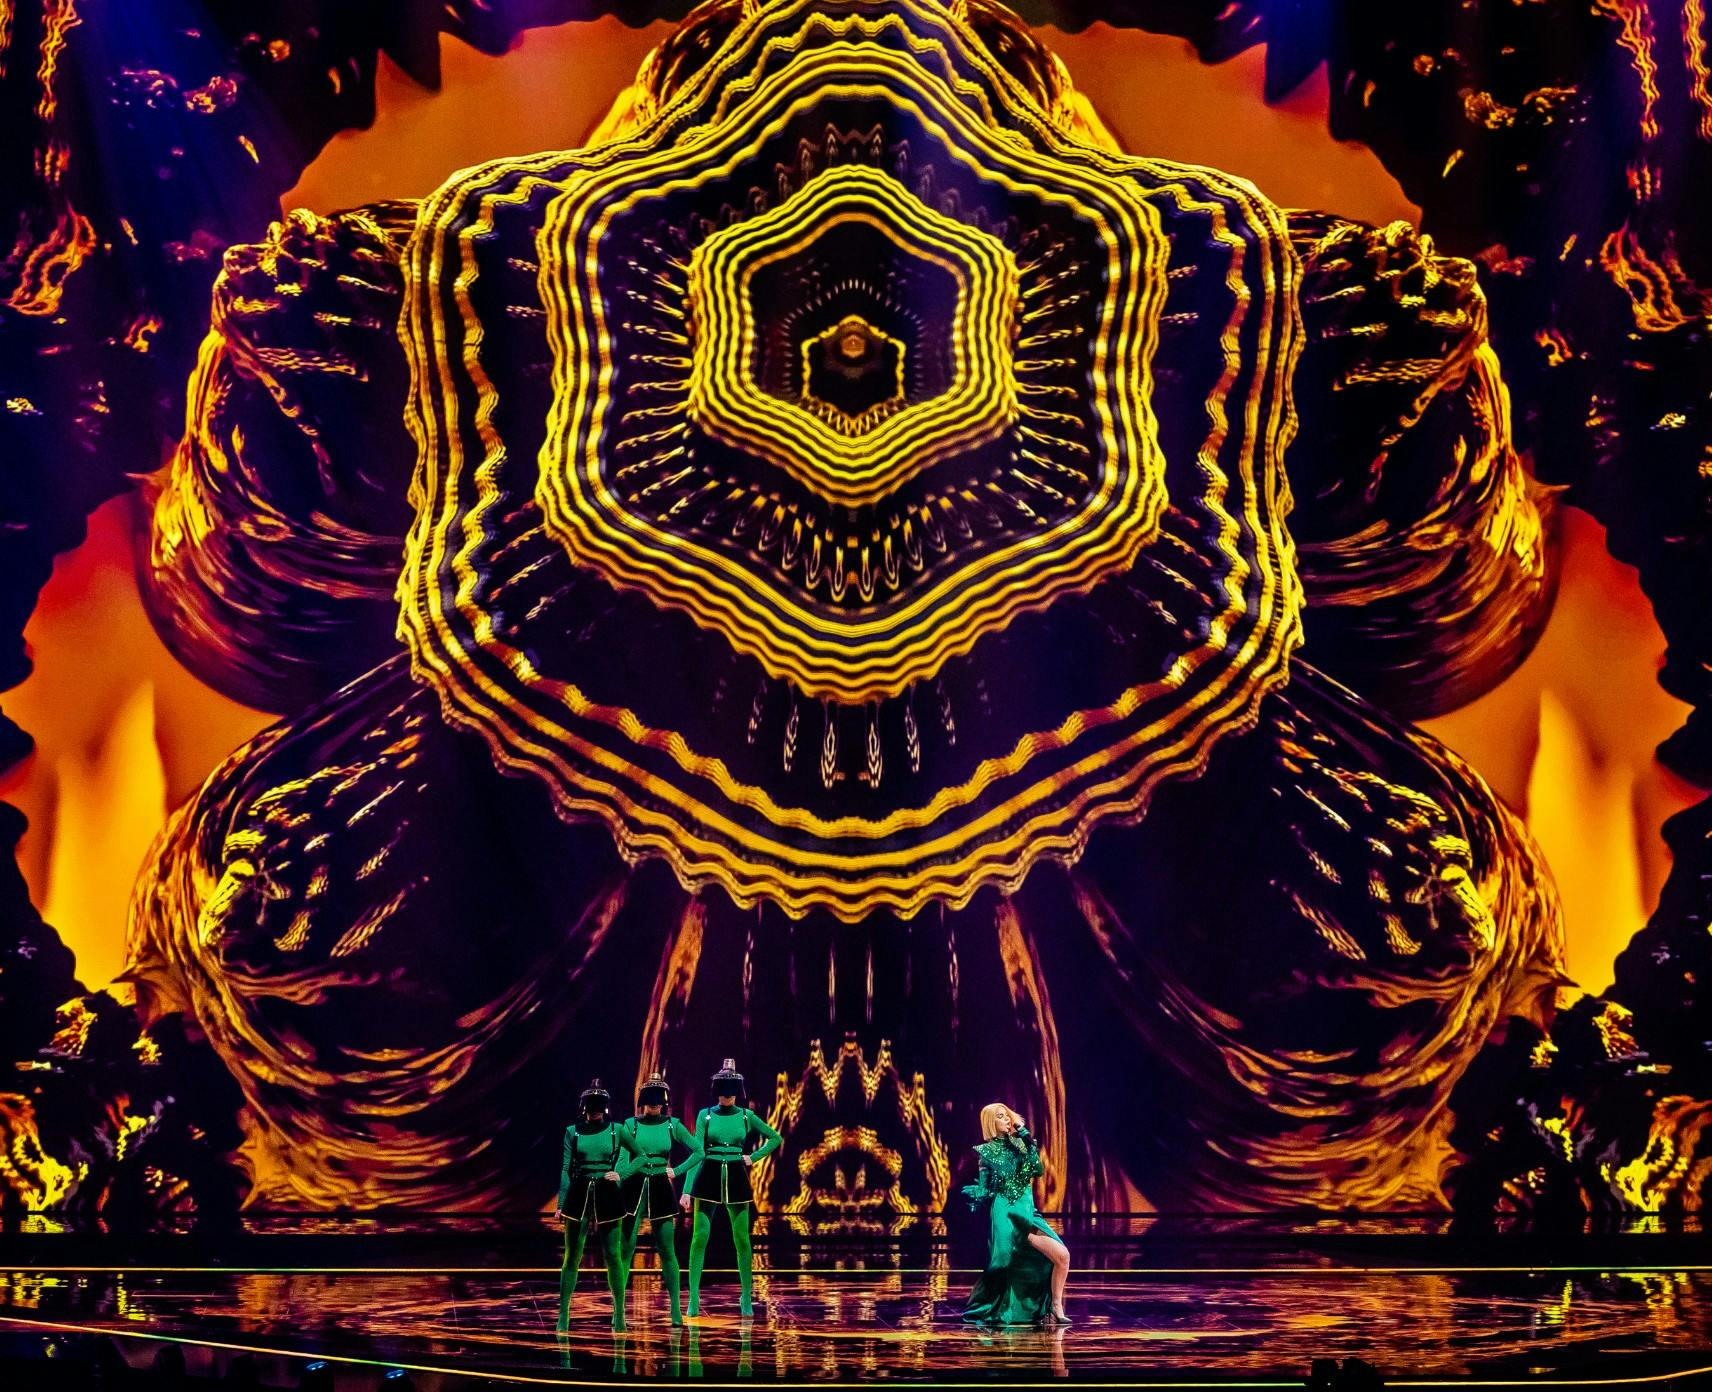 A performance of the 2021 Eurovision Song Contest, Rotterdam, The Netherlands